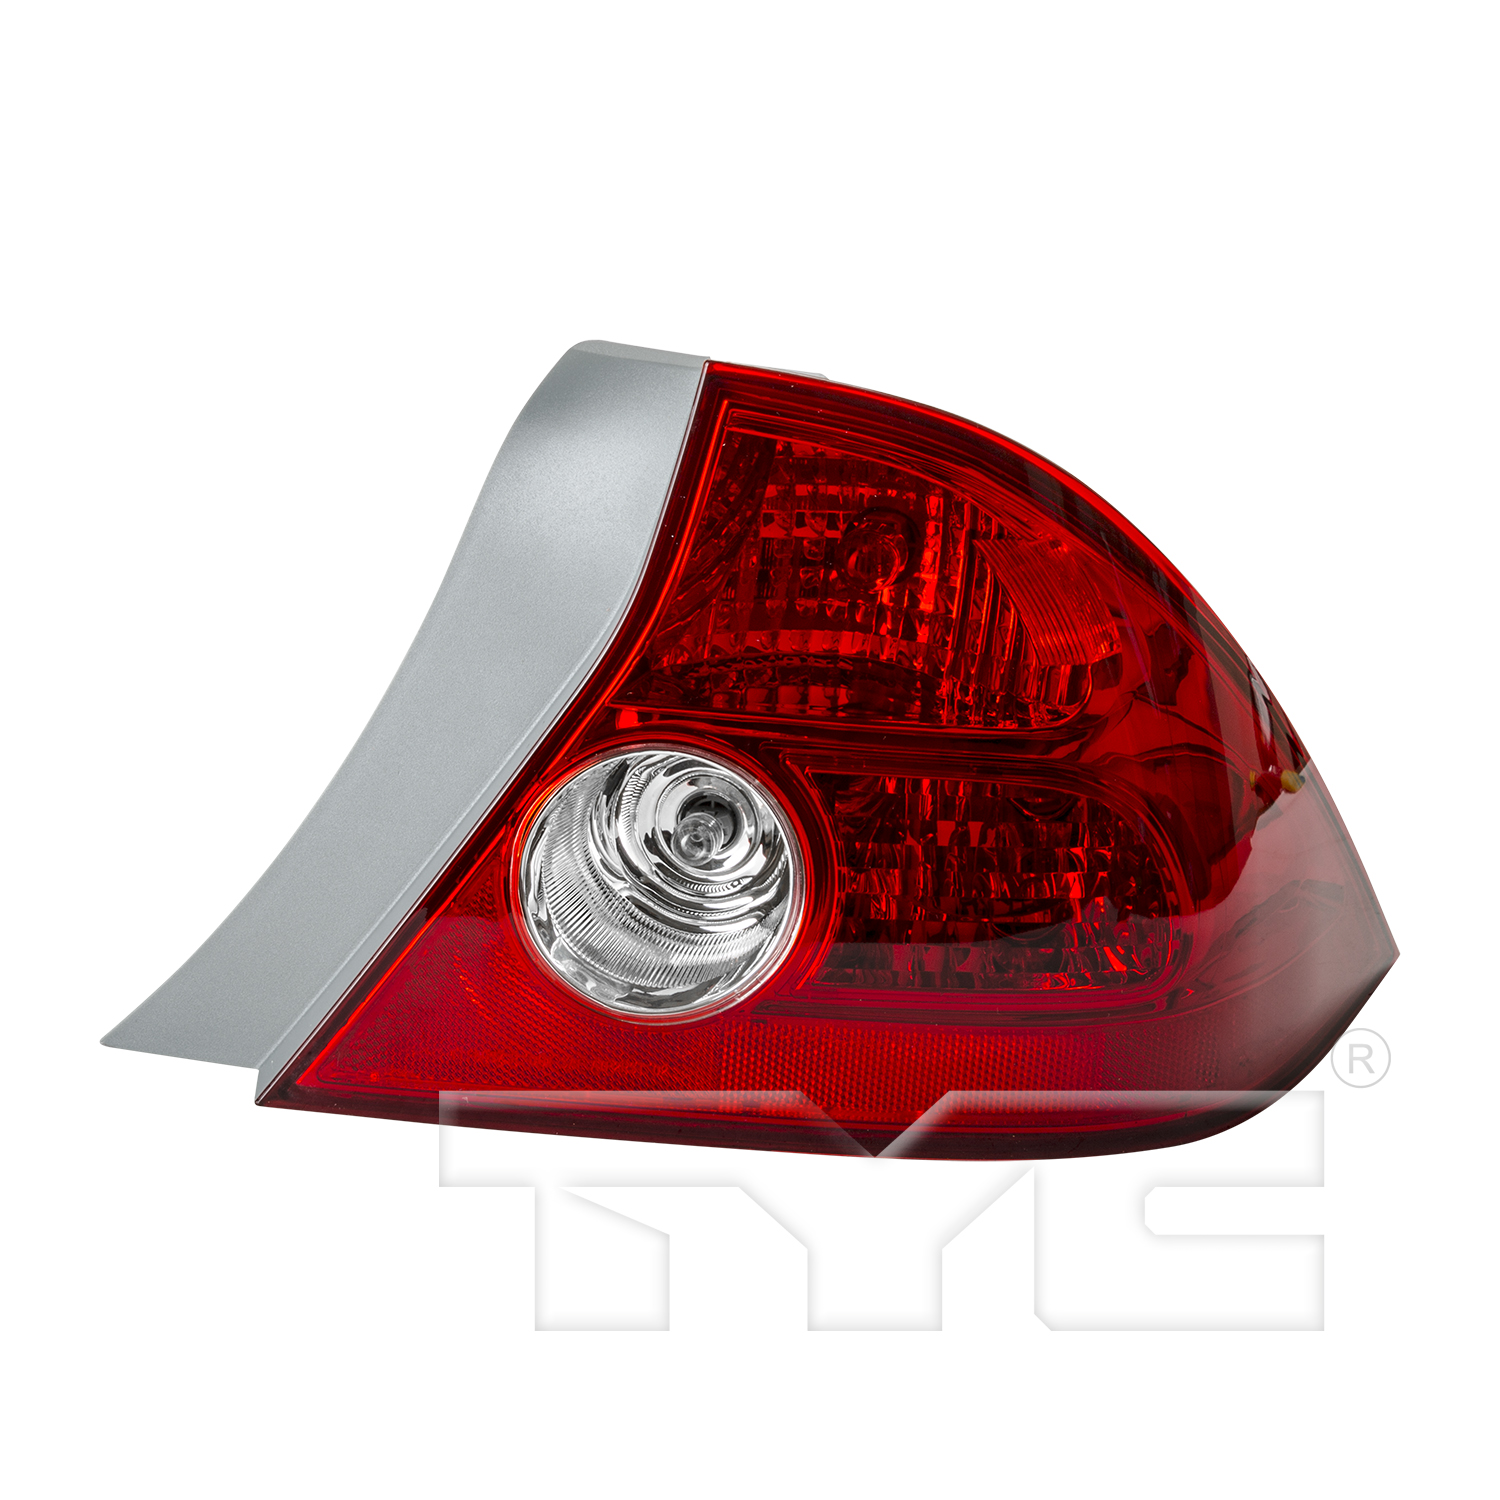 Aftermarket TAILLIGHTS for HONDA - CIVIC, CIVIC,04-05,RT Taillamp assy